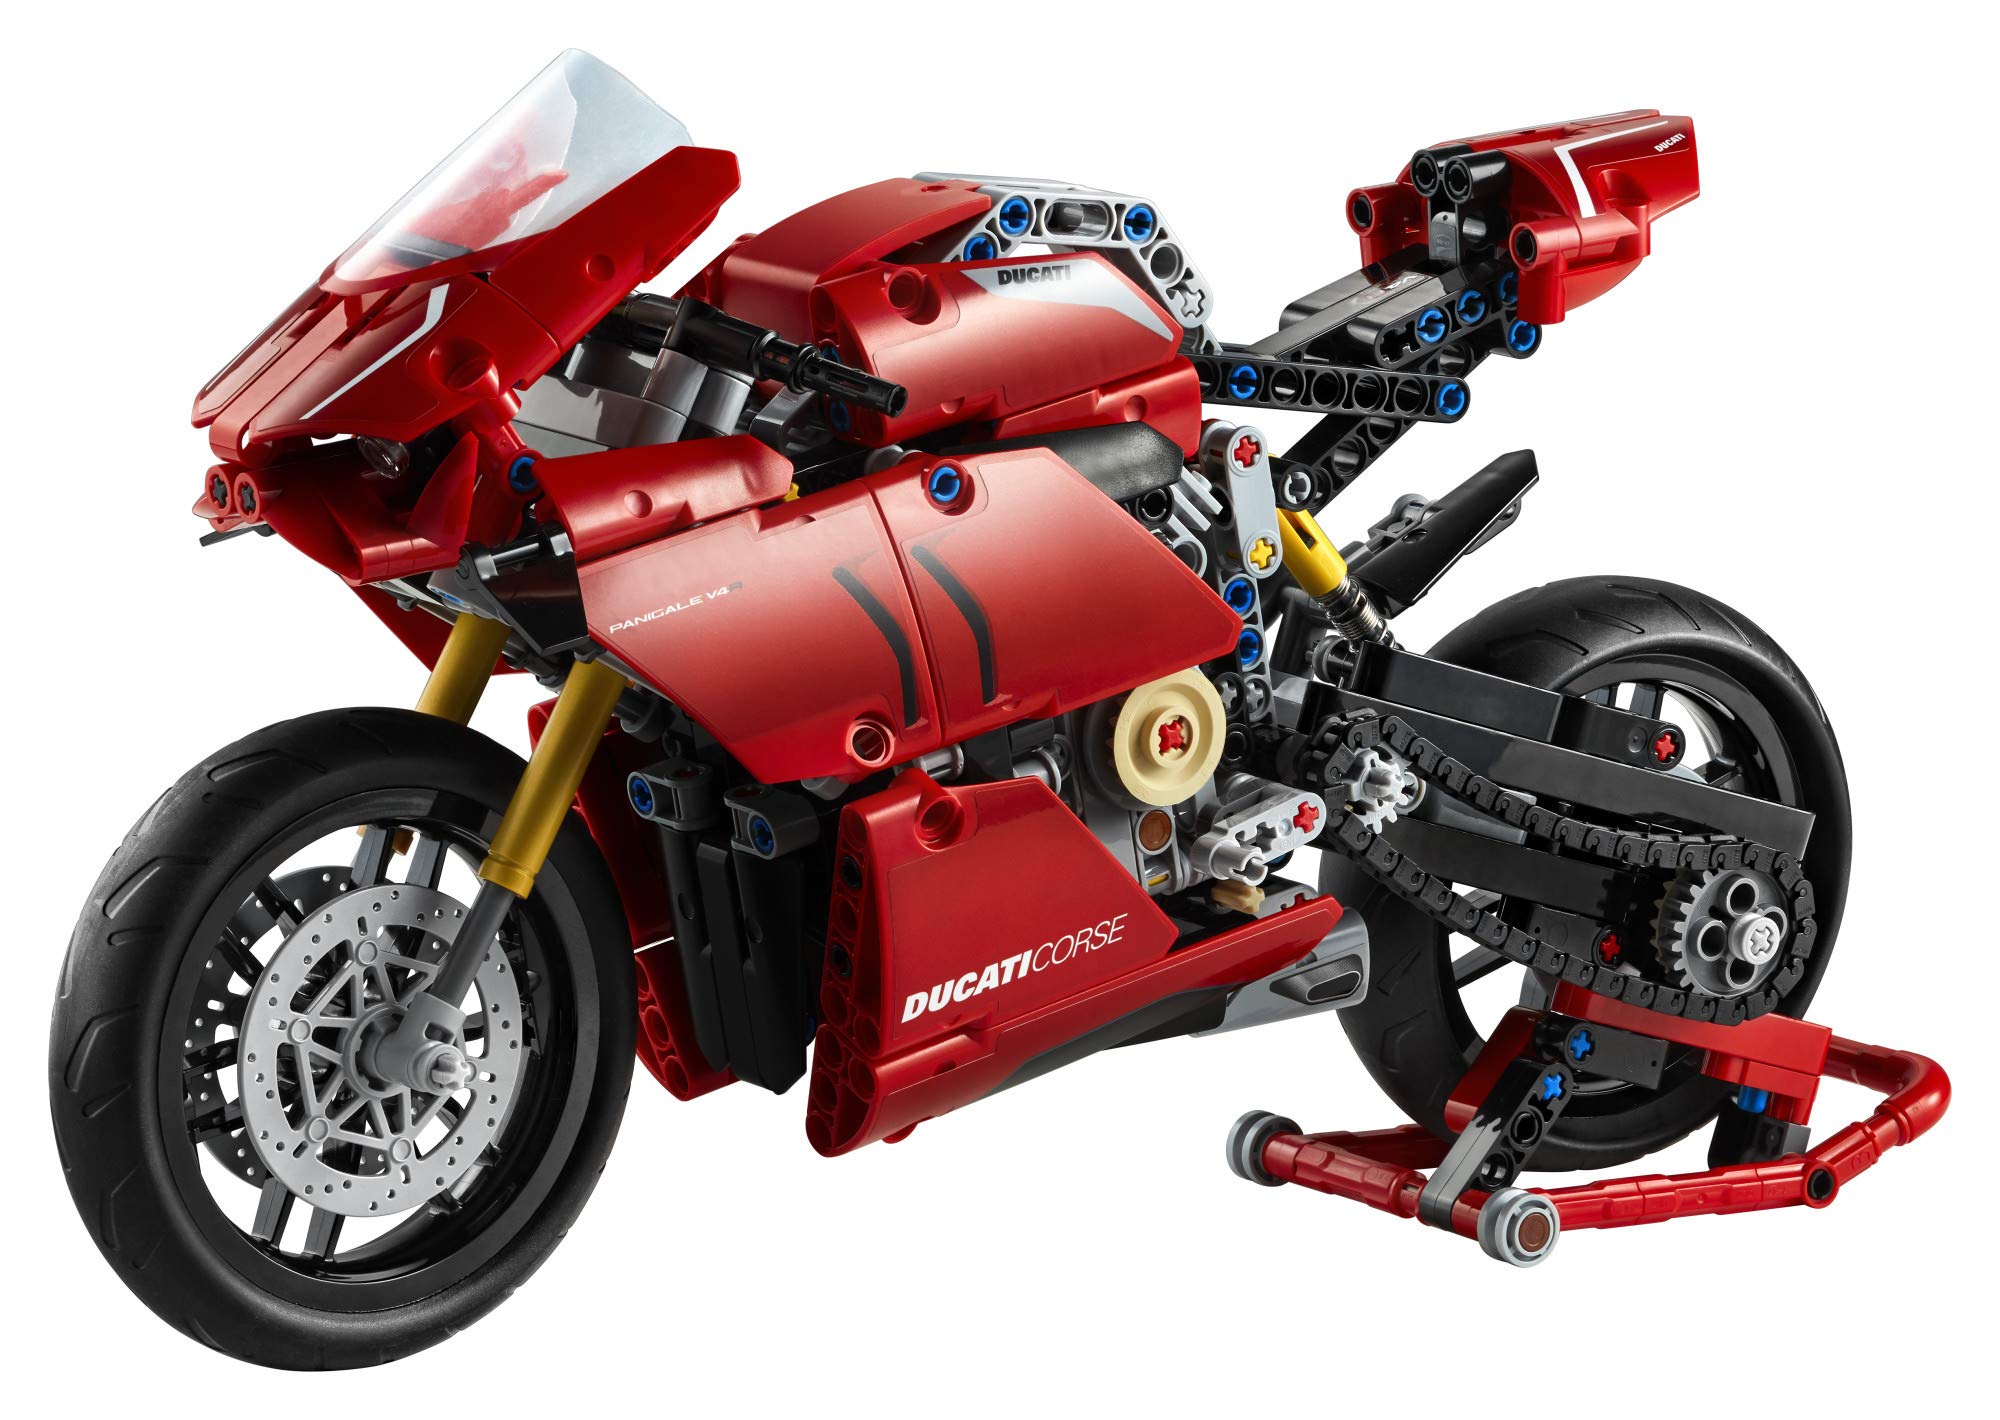 LEGO Technic Ducati Panigale V4 R Motorcycle 42107 Building Set - Collectible Superbike Display Model Kit with Gearbox and Working Suspension, Fun for Adults, and Motorcycle Enthusiasts